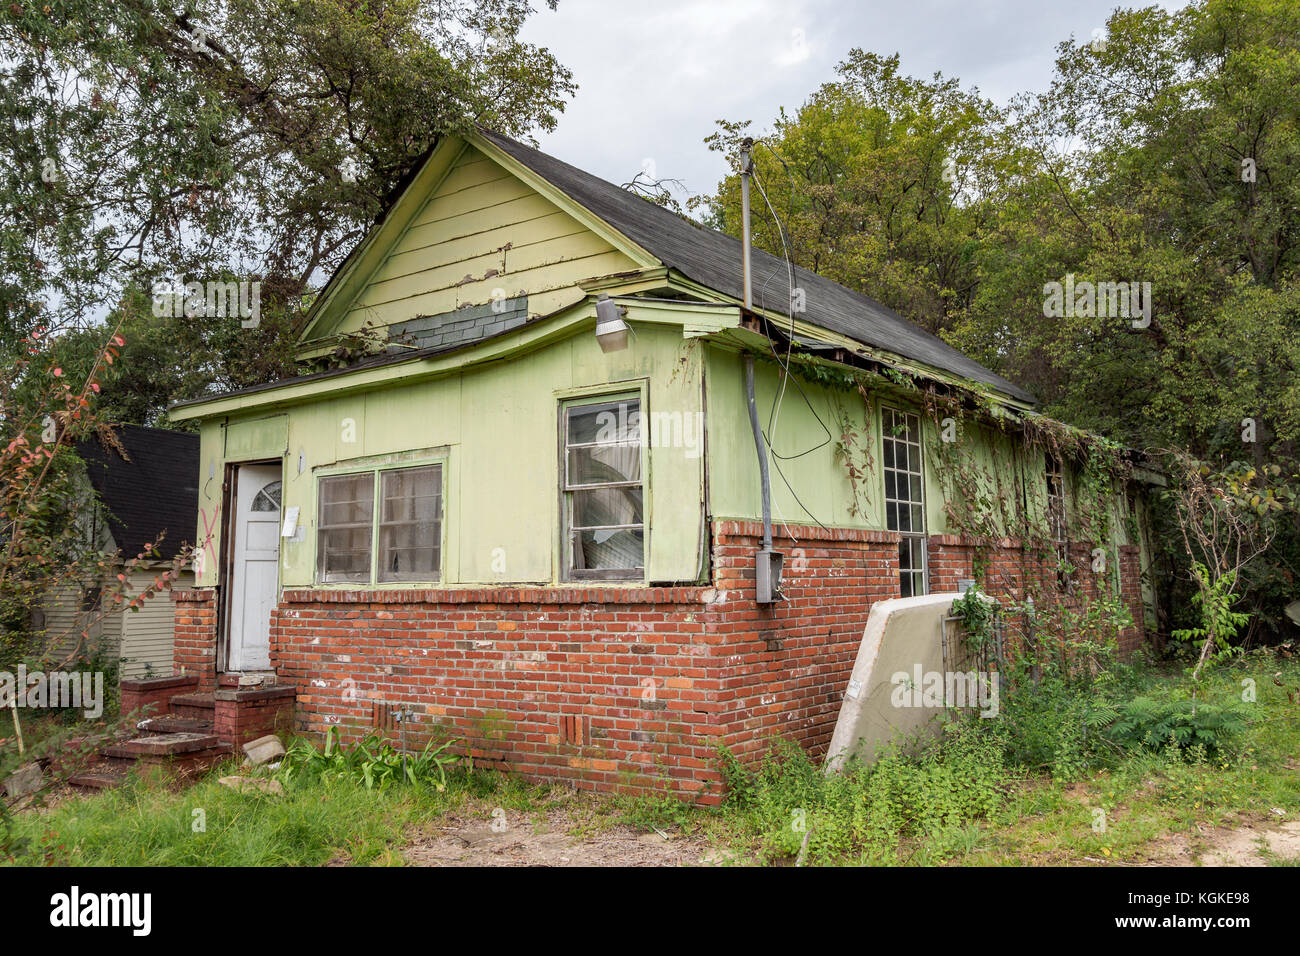 Boarded up, abandoned, house showing urban decline, decay, blight, and American poverty in Montgomery, Alabama USA. Stock Photo